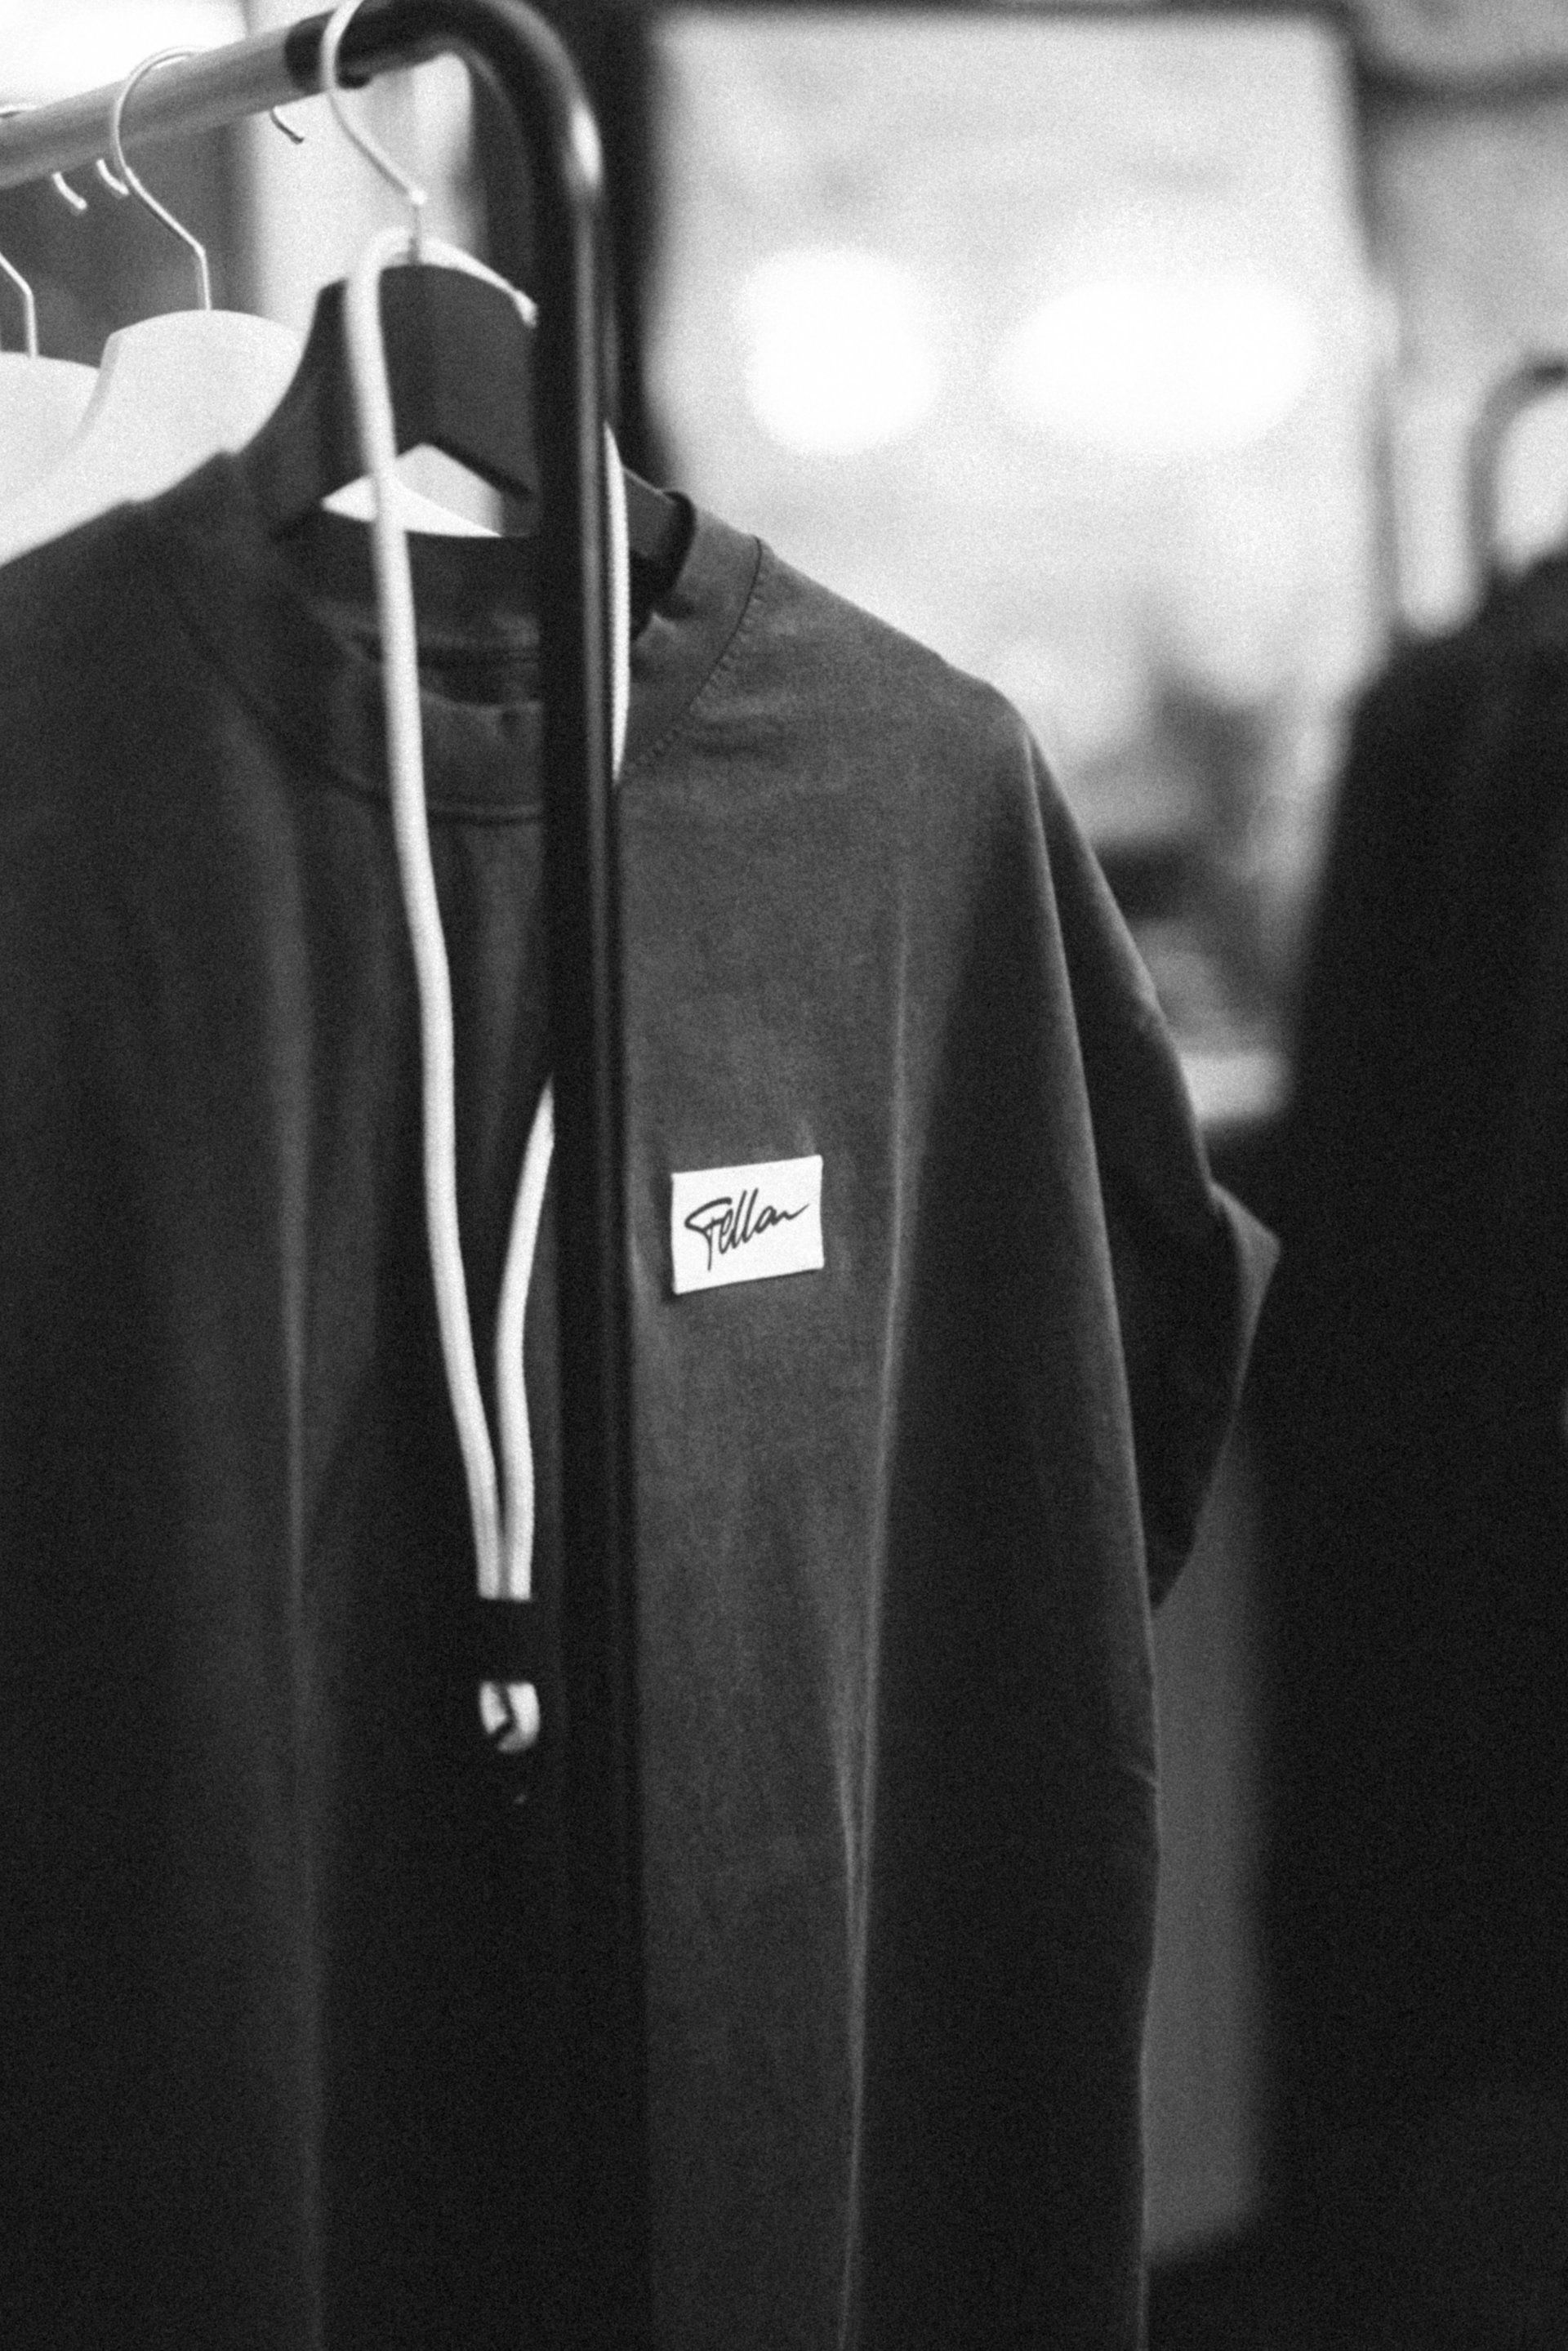 A monochromatic glimpse into a fashion-forward wardrobe featuring a shirt with a visible branded tag hanging amidst other apparel.